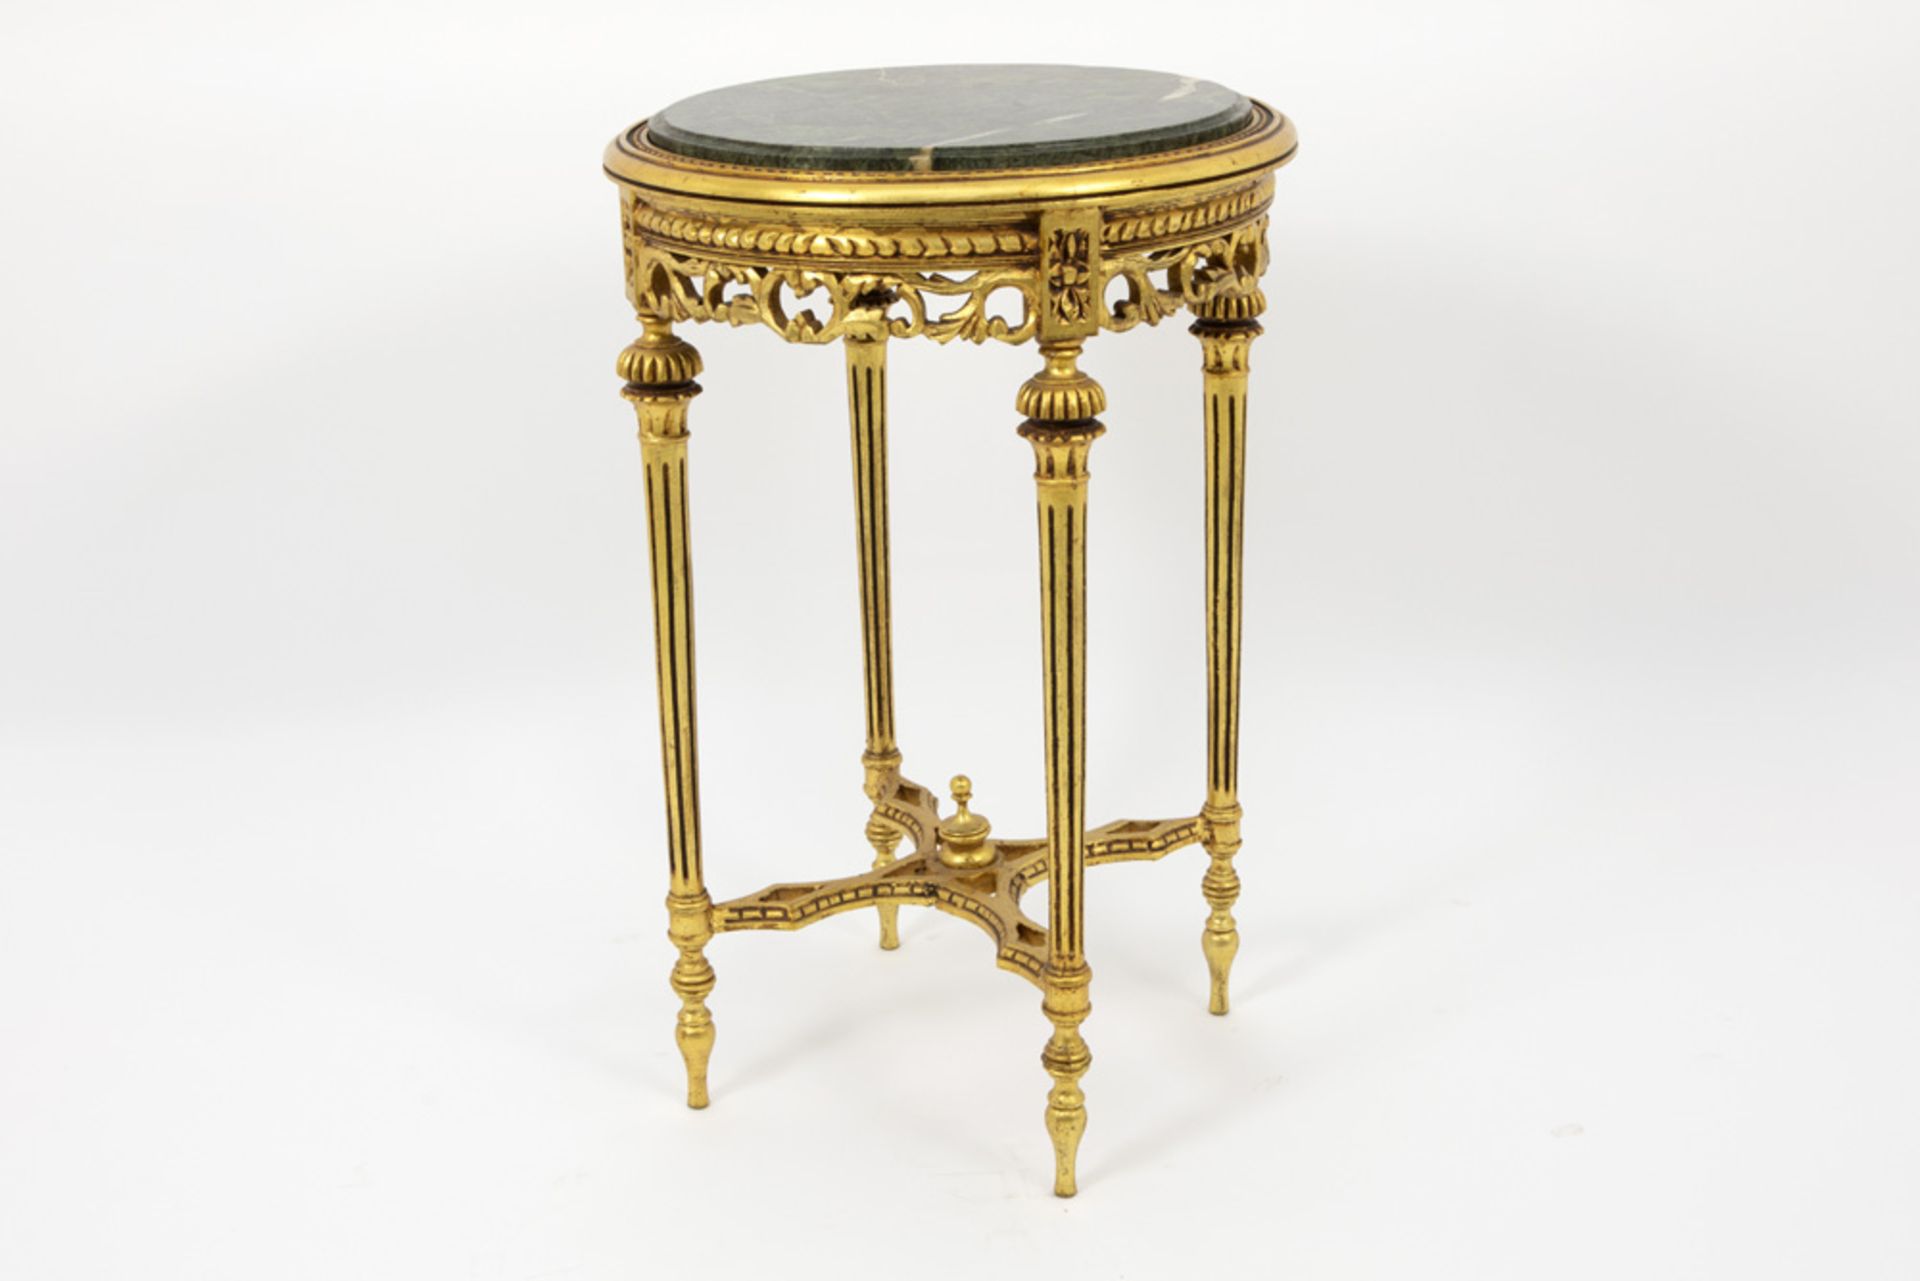 Italian neoclassical occasional table in gilded wood with a marble top